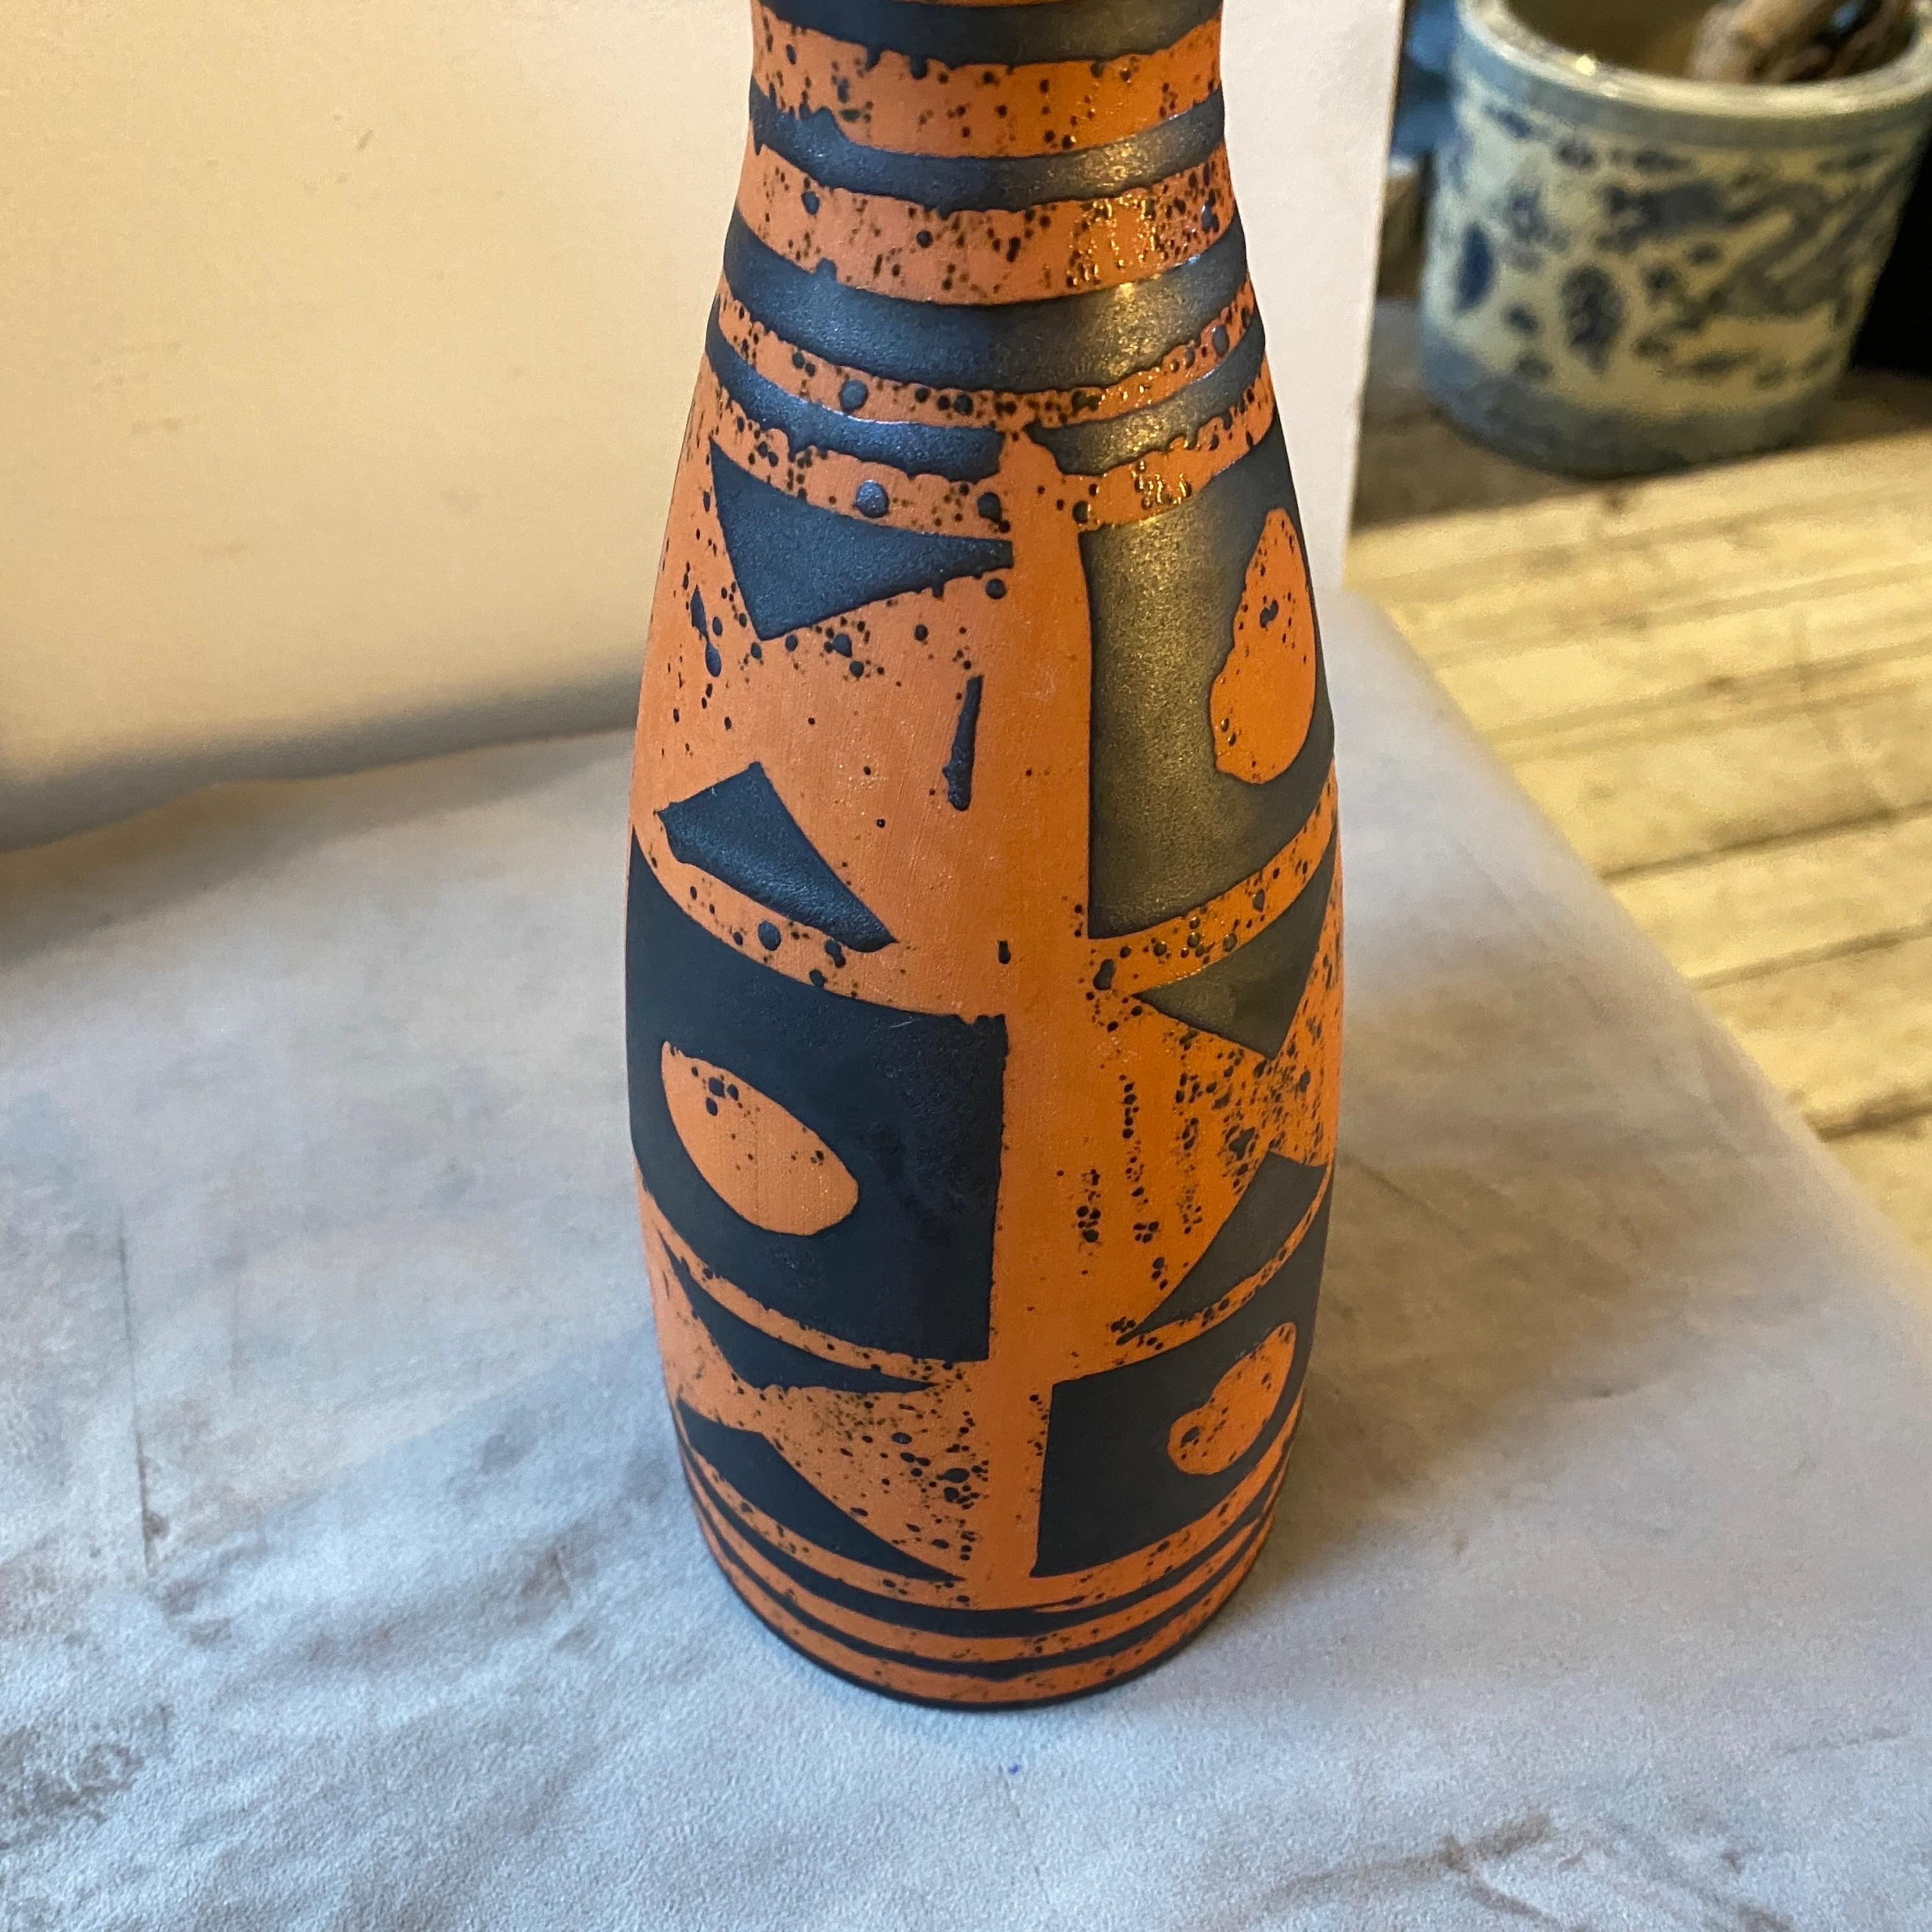 A rare red and black ceramic vase made in West Germany in the Seventies by famous manufacturer Carstens Tönnieshof, it has hand-painted and it's in perfect condition.